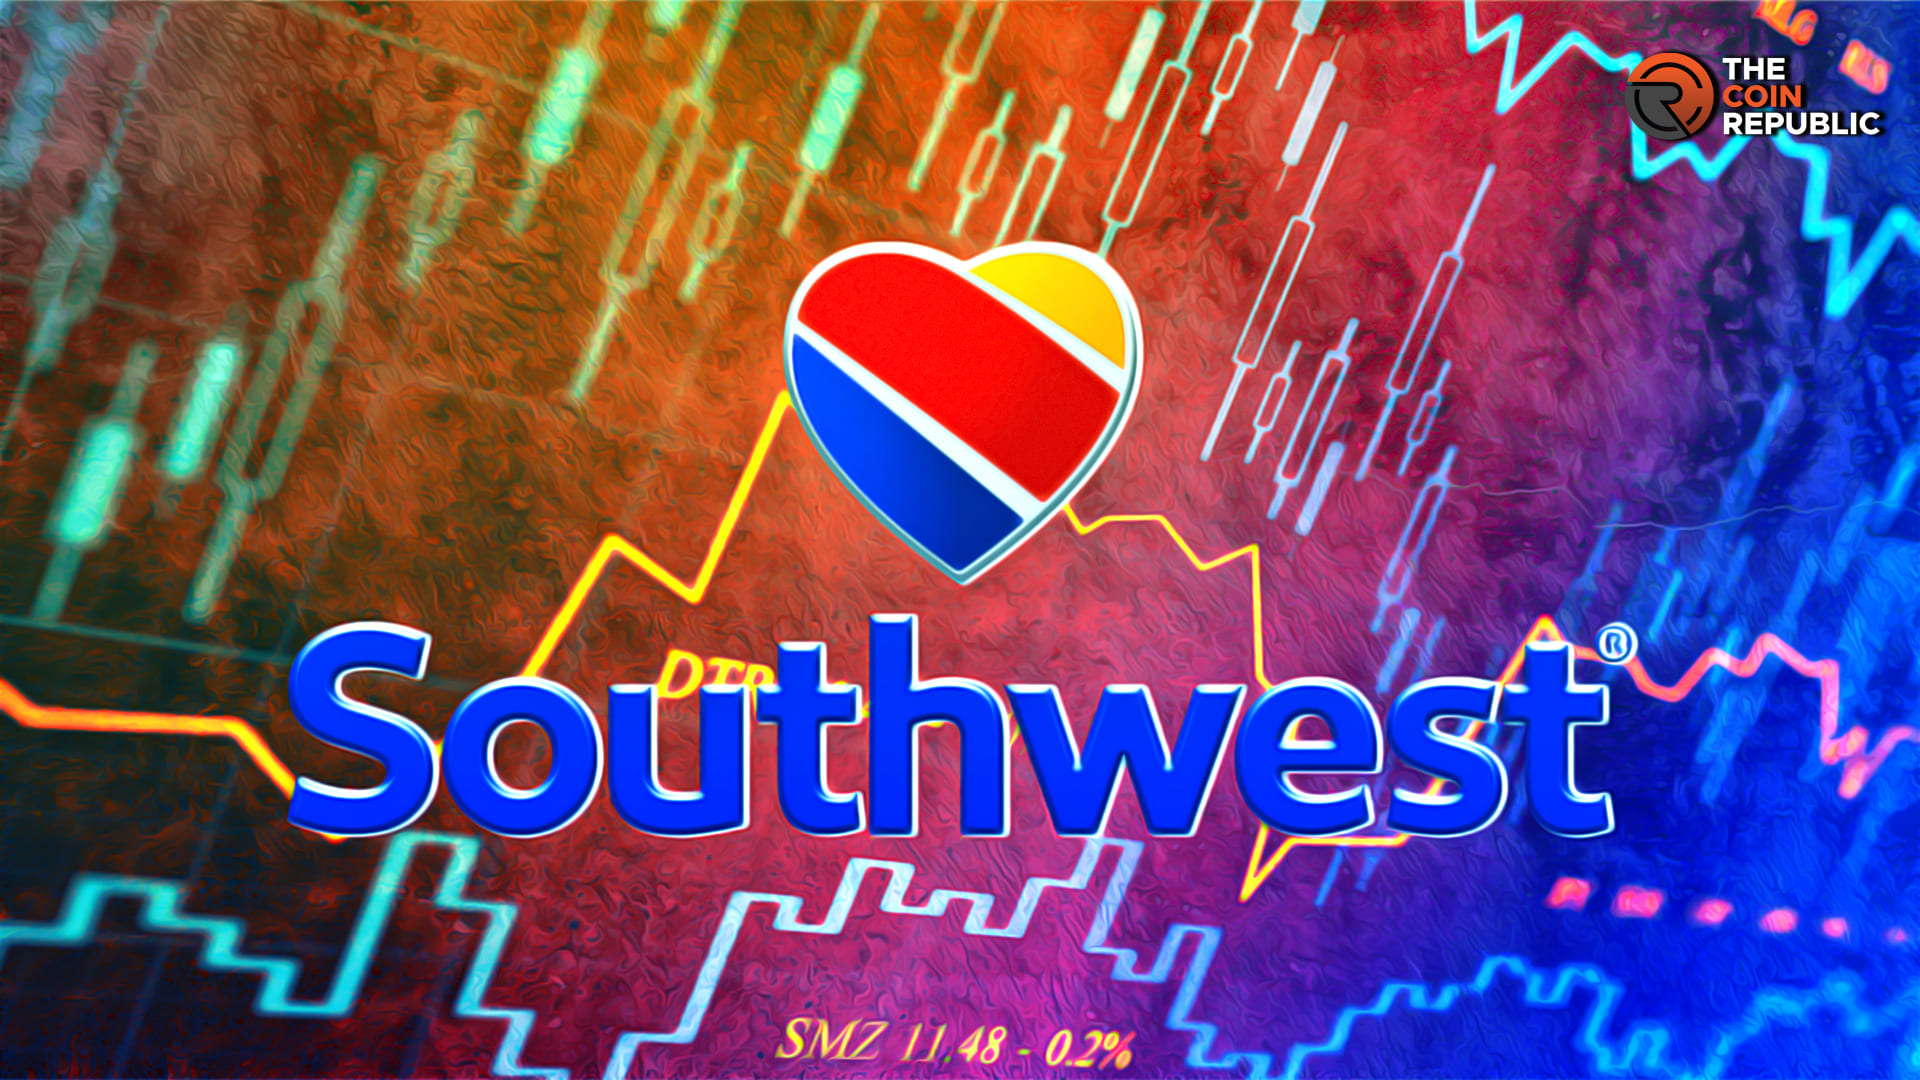 Can Quarterly Earnings Save Southwest Airlines’ Stock Crash?